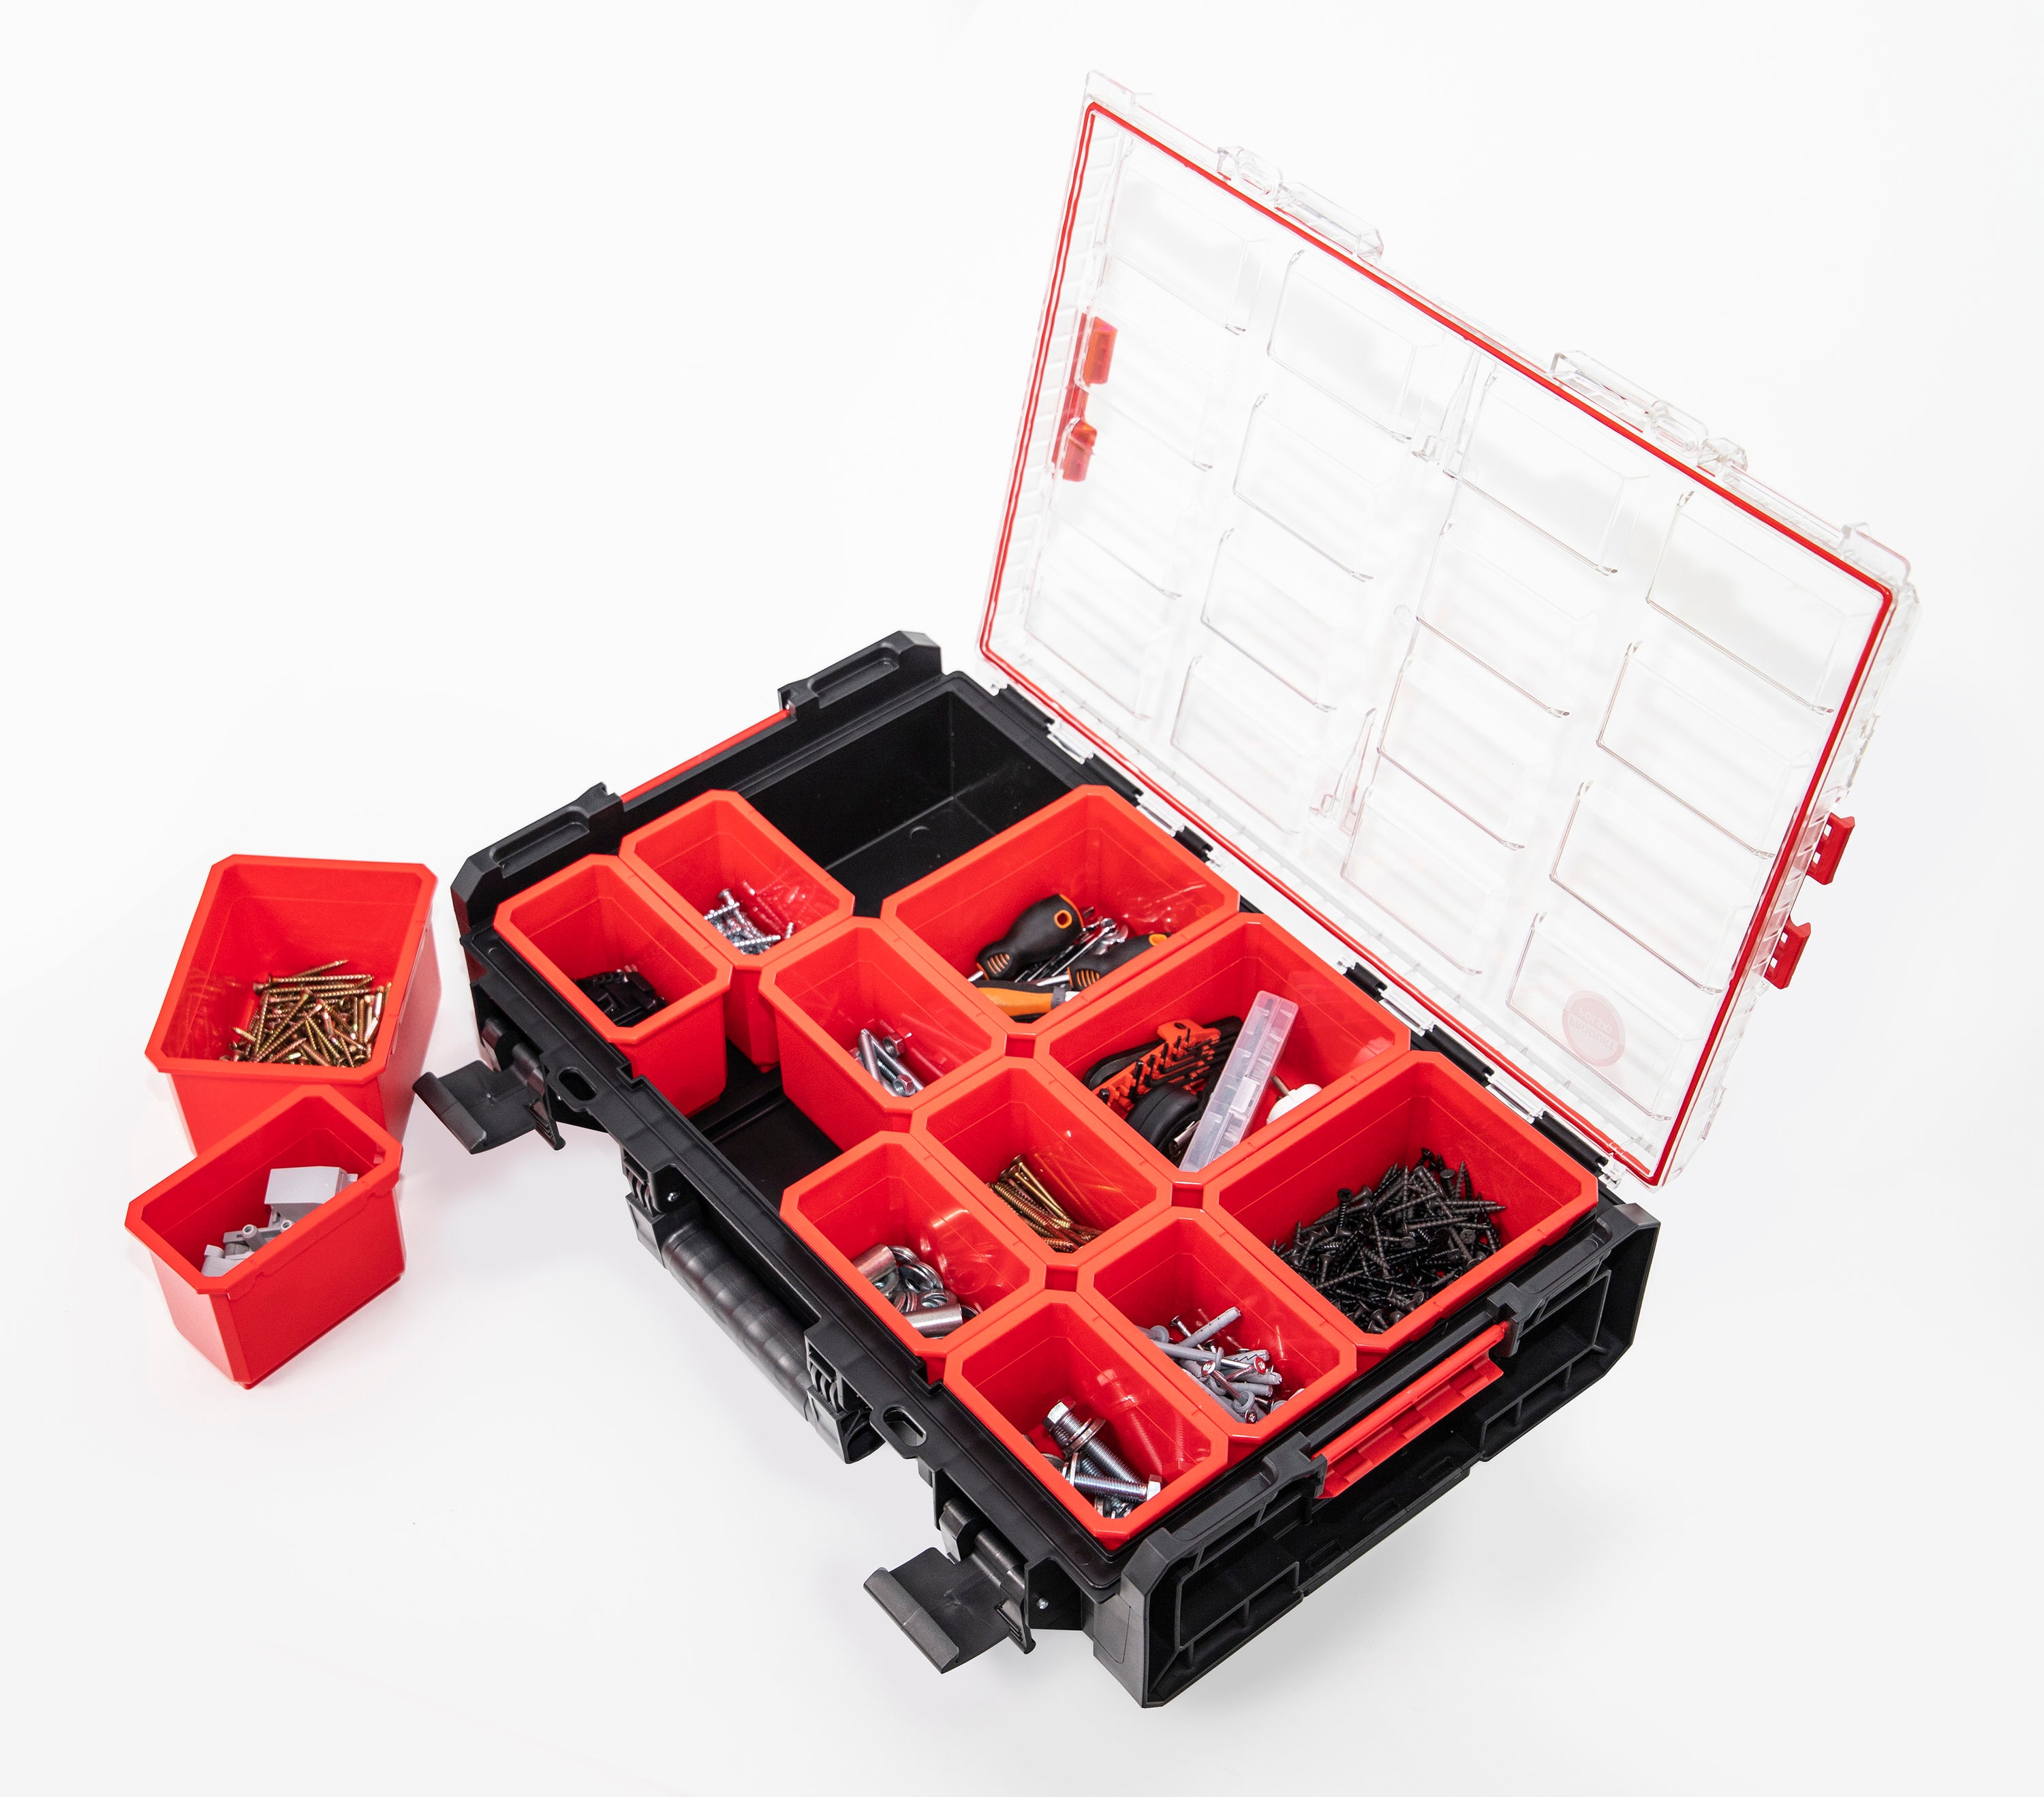 Organizer in SYSTEM Parts XL ONE Qbrick System Organizers the department Small QBRICK at